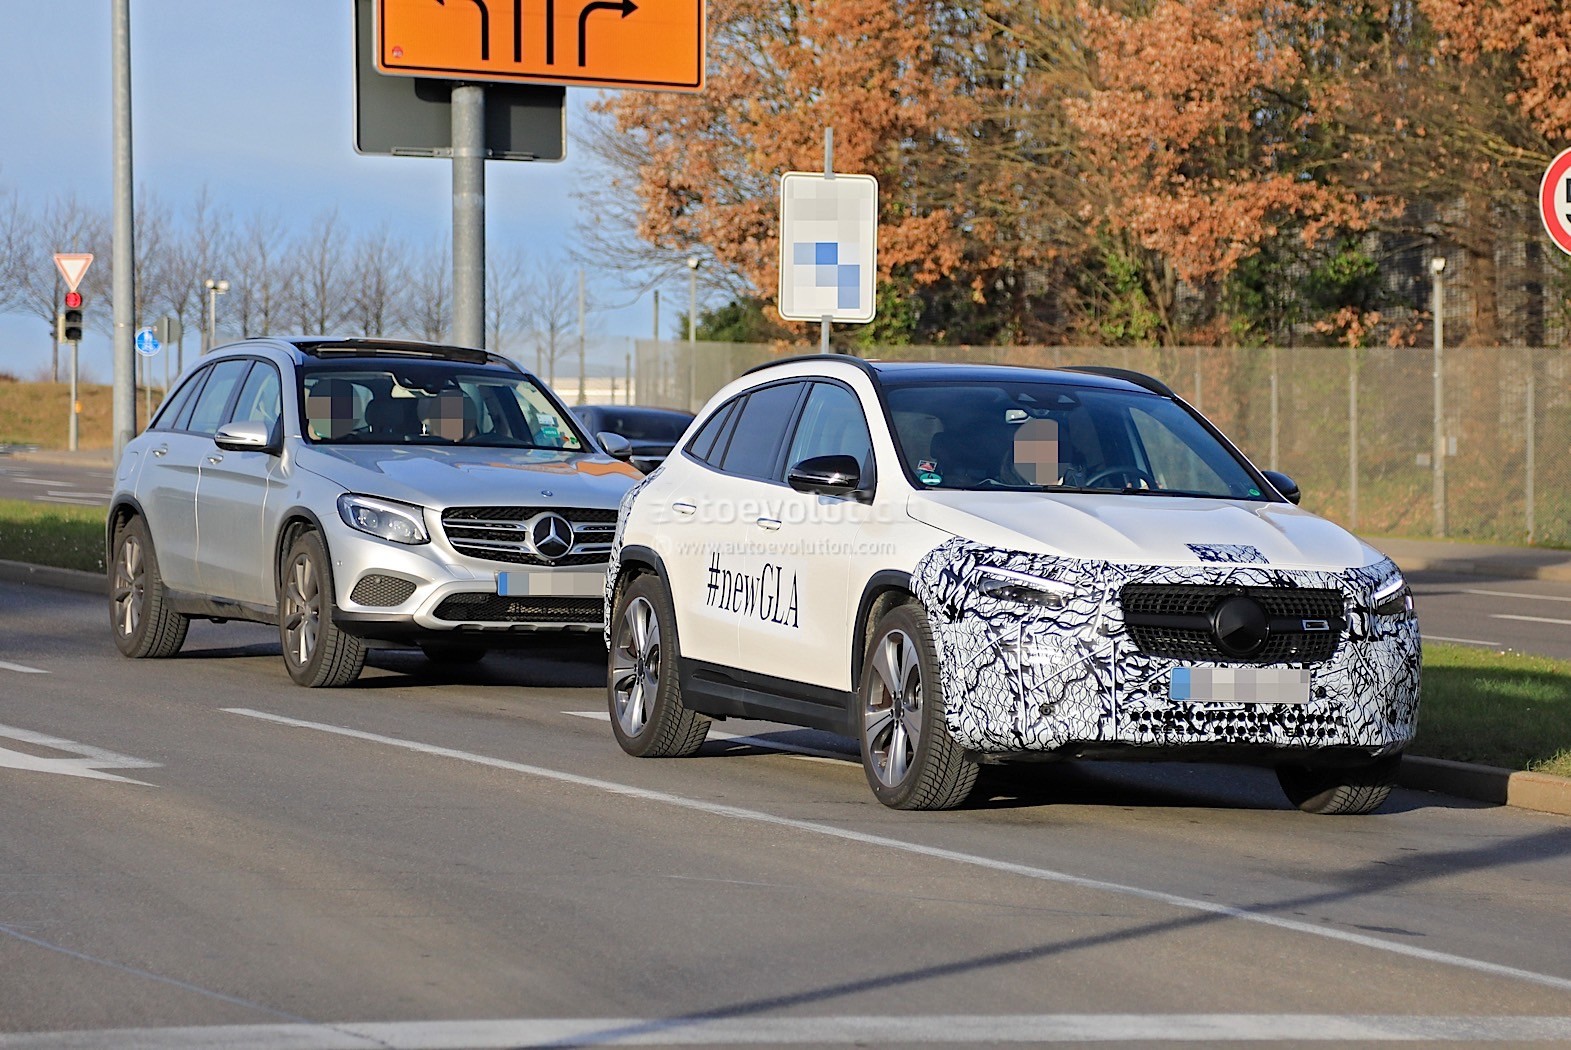 https://s1.cdn.autoevolution.com/images/news/gallery/2020-mercedes-benz-gla-prototype-strips-2-days-before-official-reveal_1.jpg